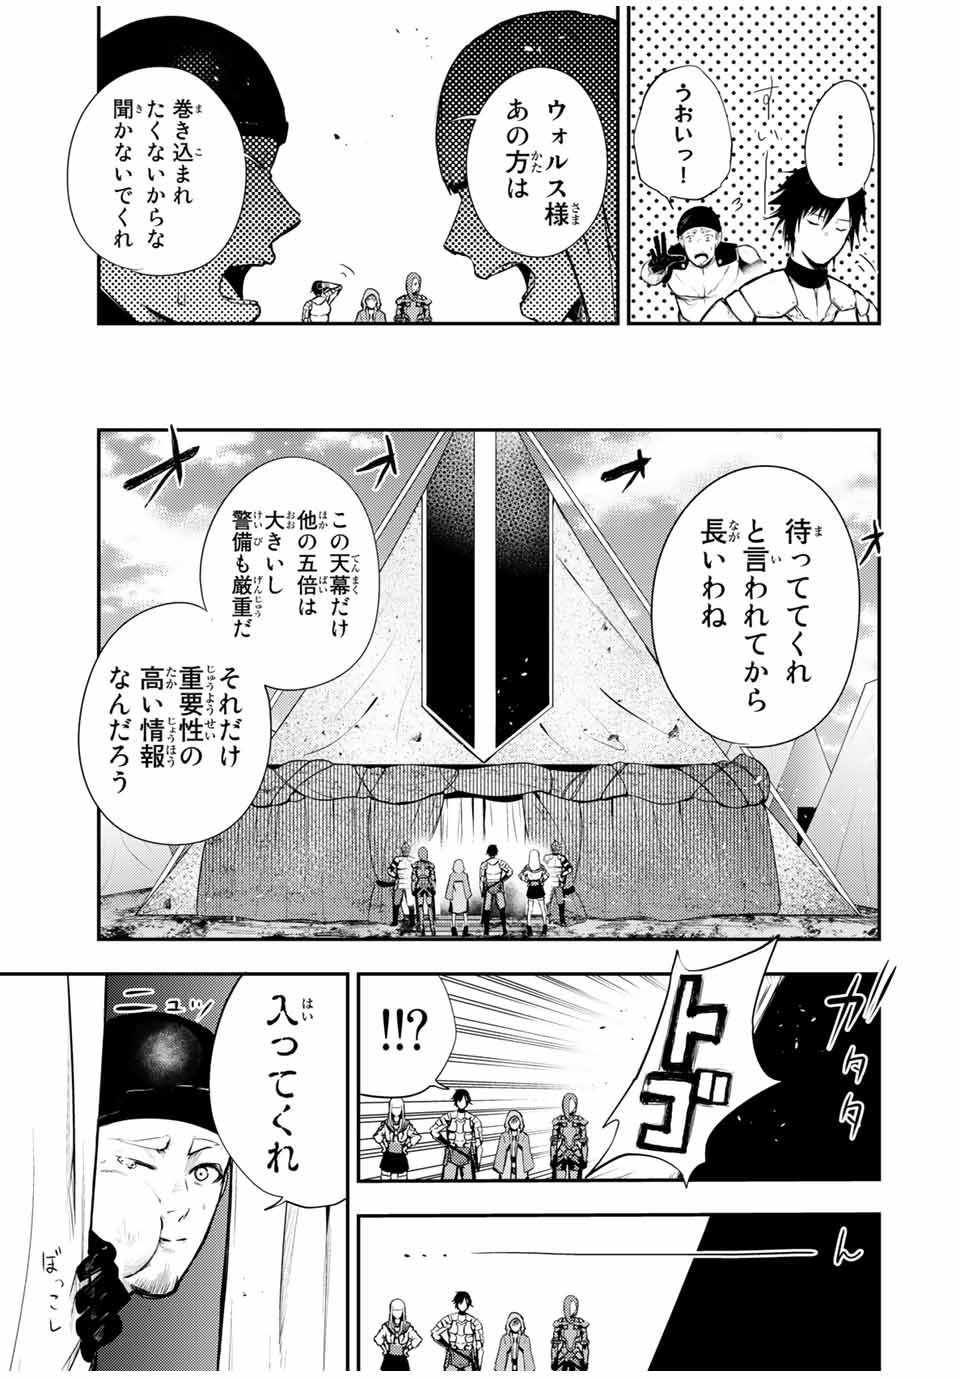 the strongest former prince-; 奴隷転生 ～その奴隷、最強の元王子につき～ 第27話 - Page 17